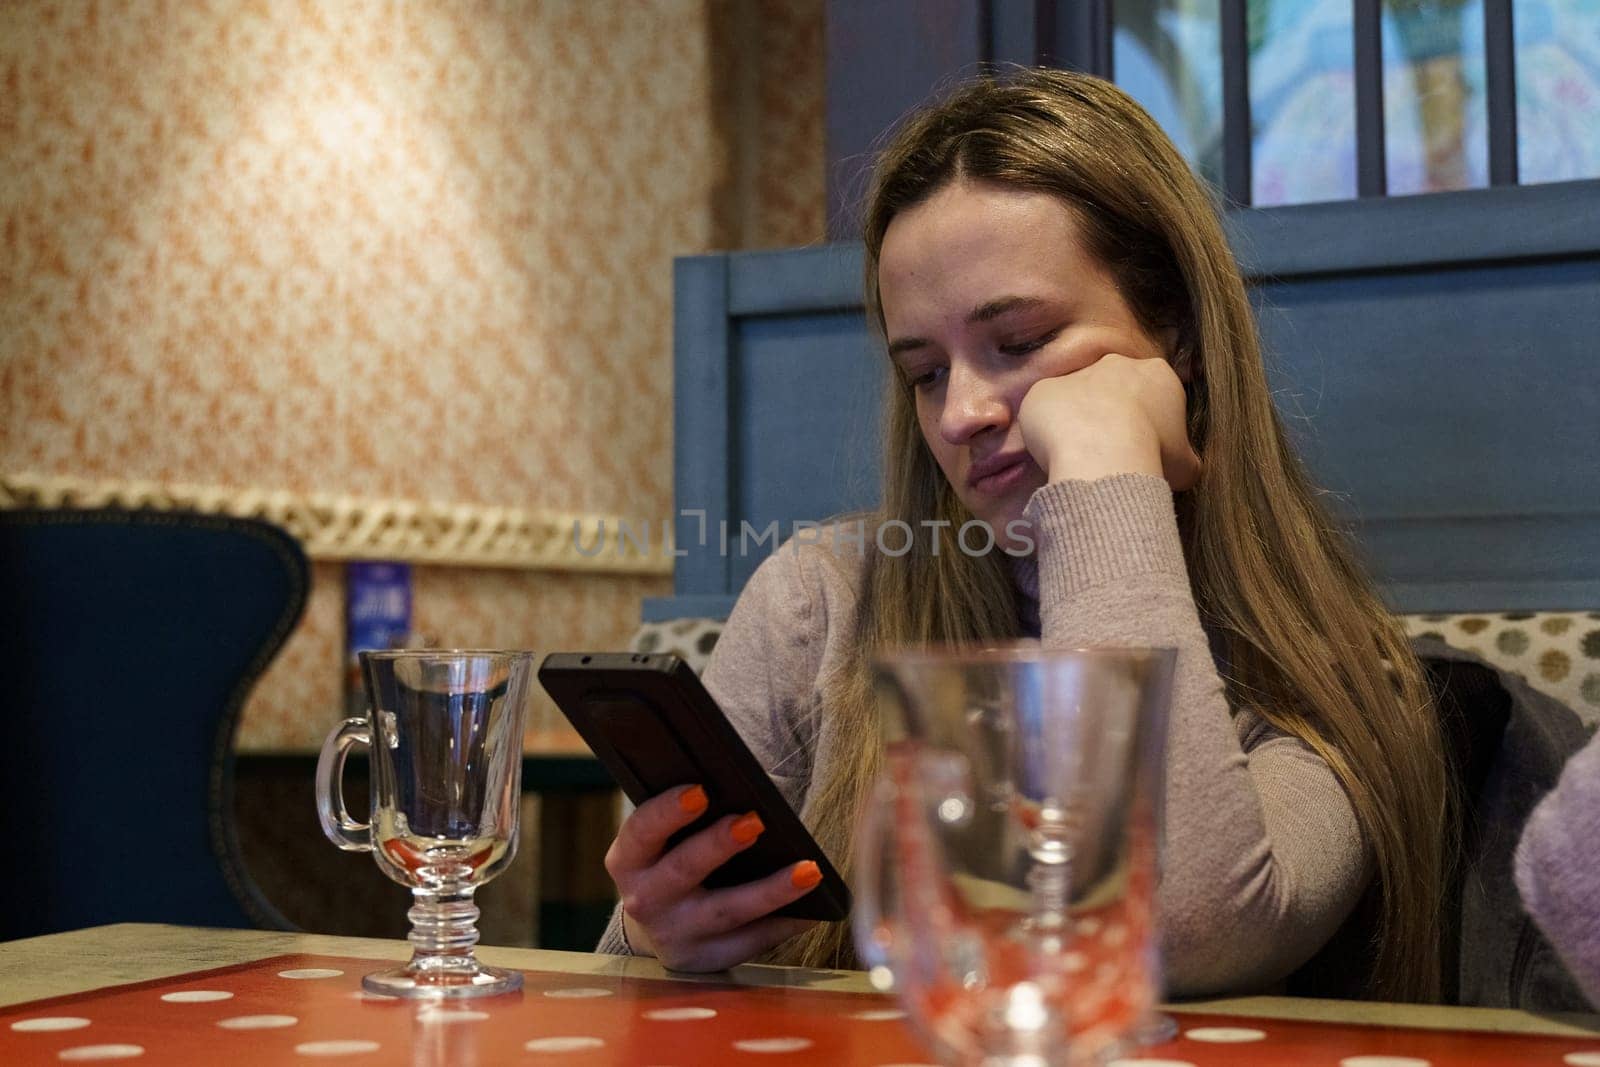 A young woman is sitting in a cafe, looking into a smartphone, waiting. Close-up.